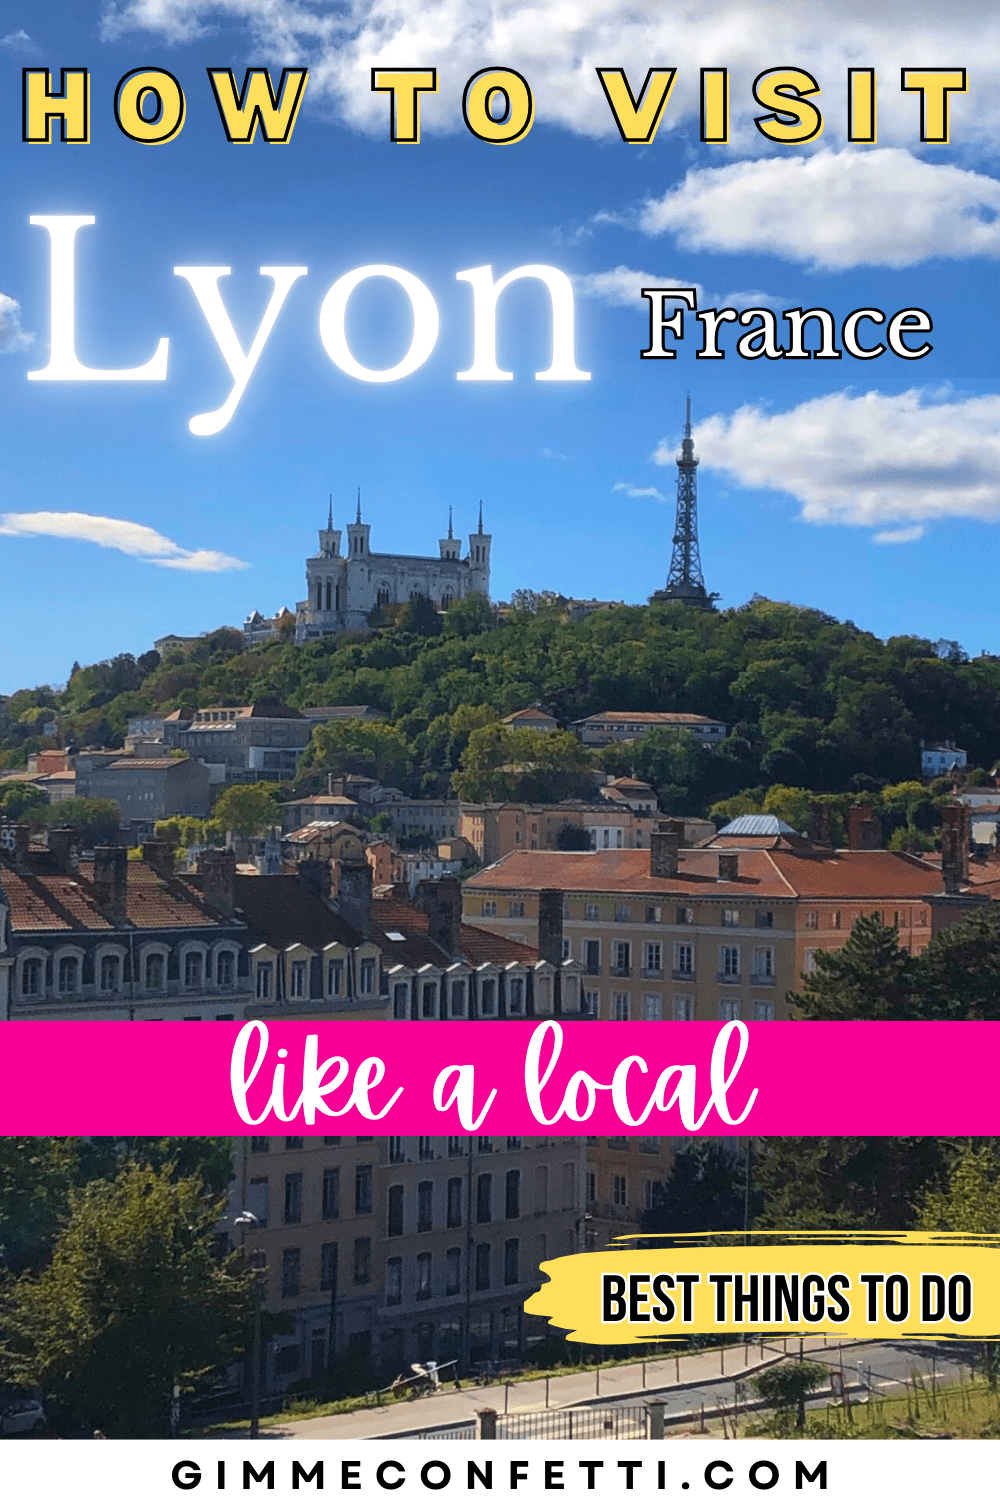 best things to do in lyon france travel guide